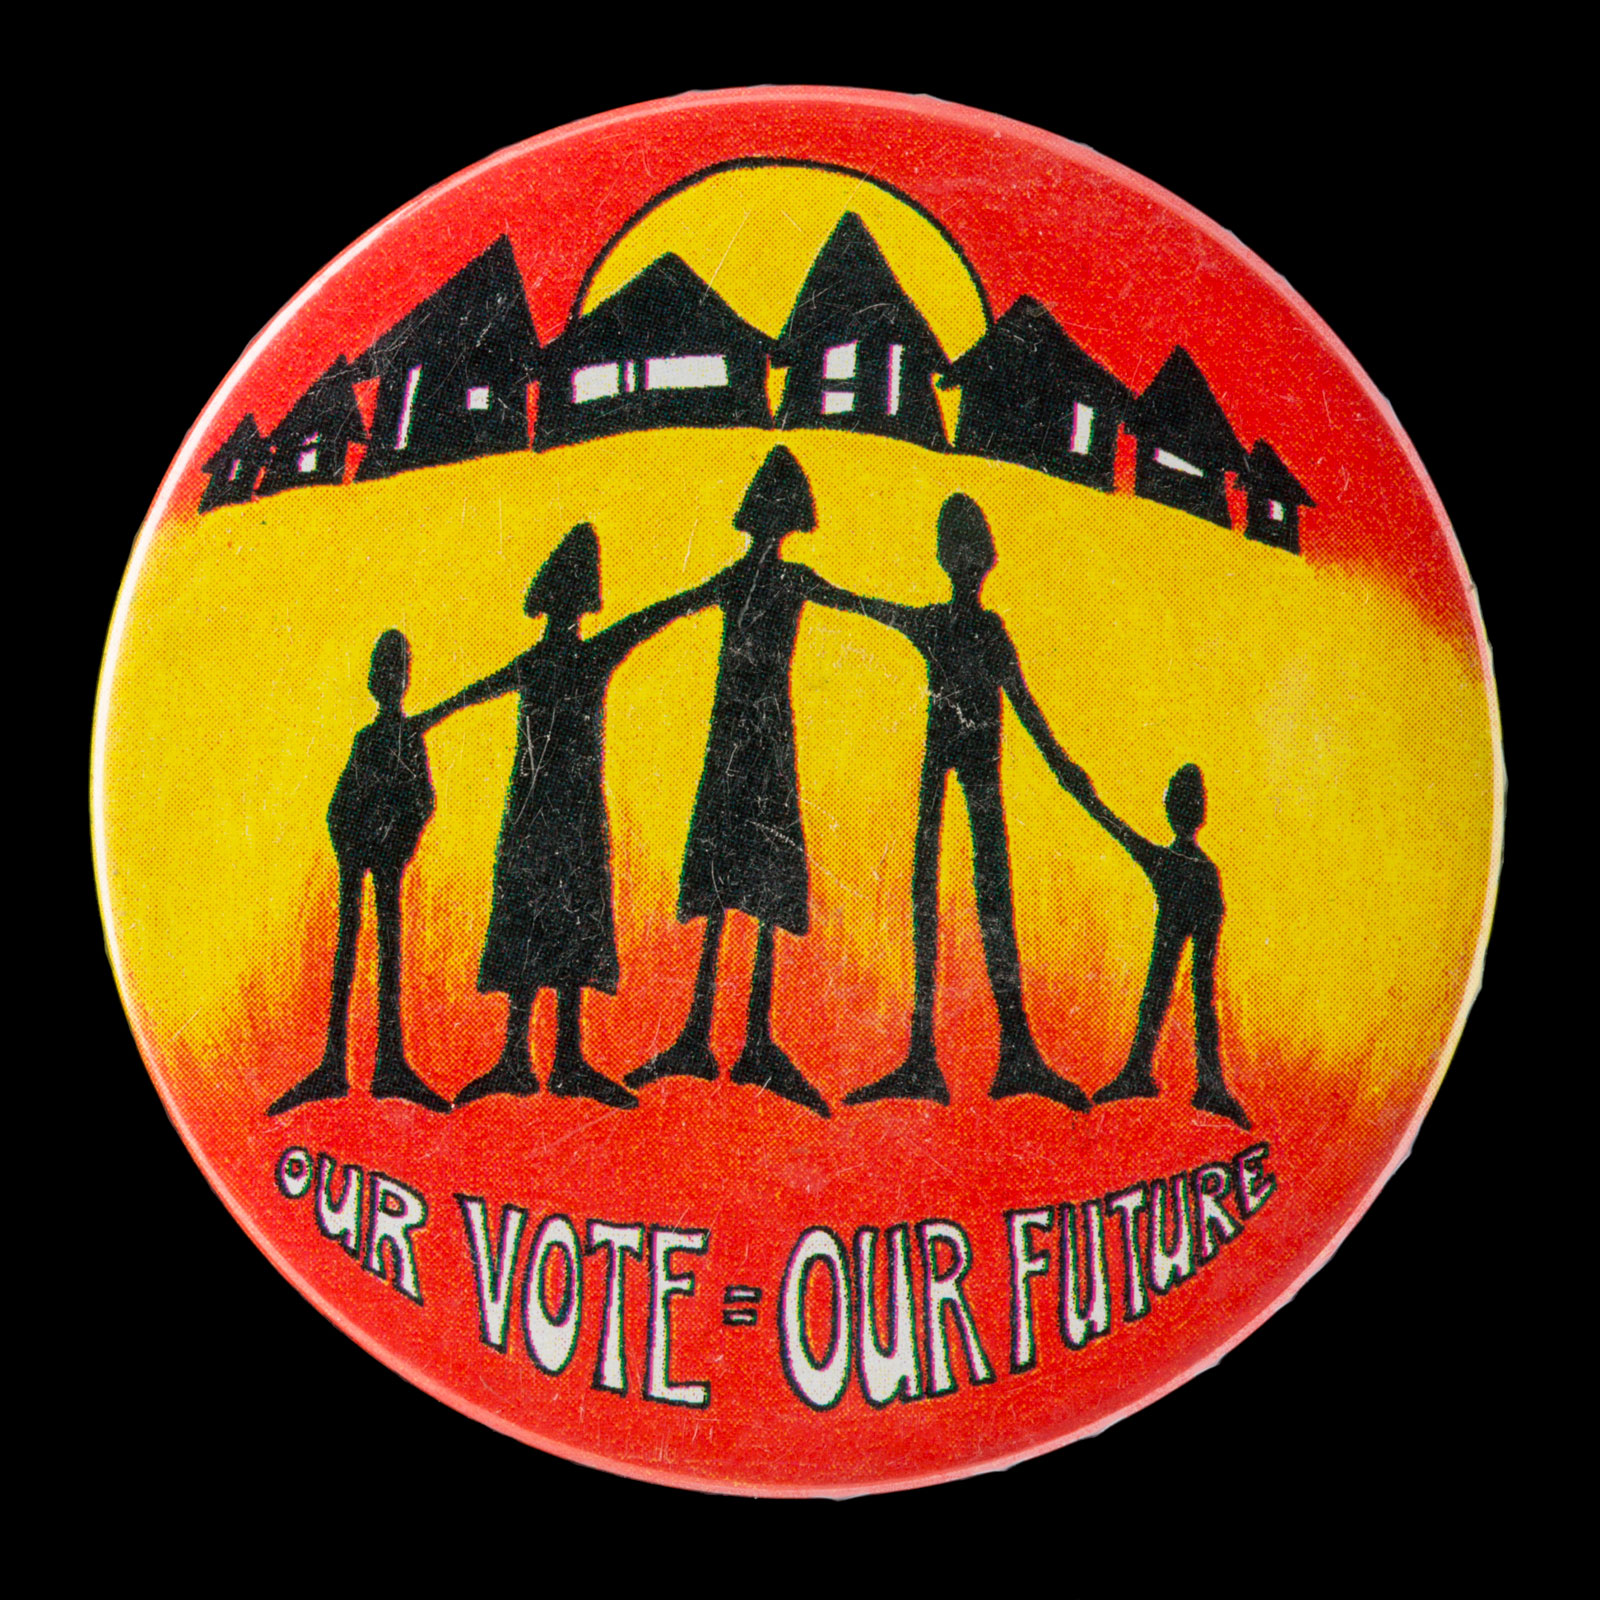 <p>‘Our vote = our future’ metal badge</p>
